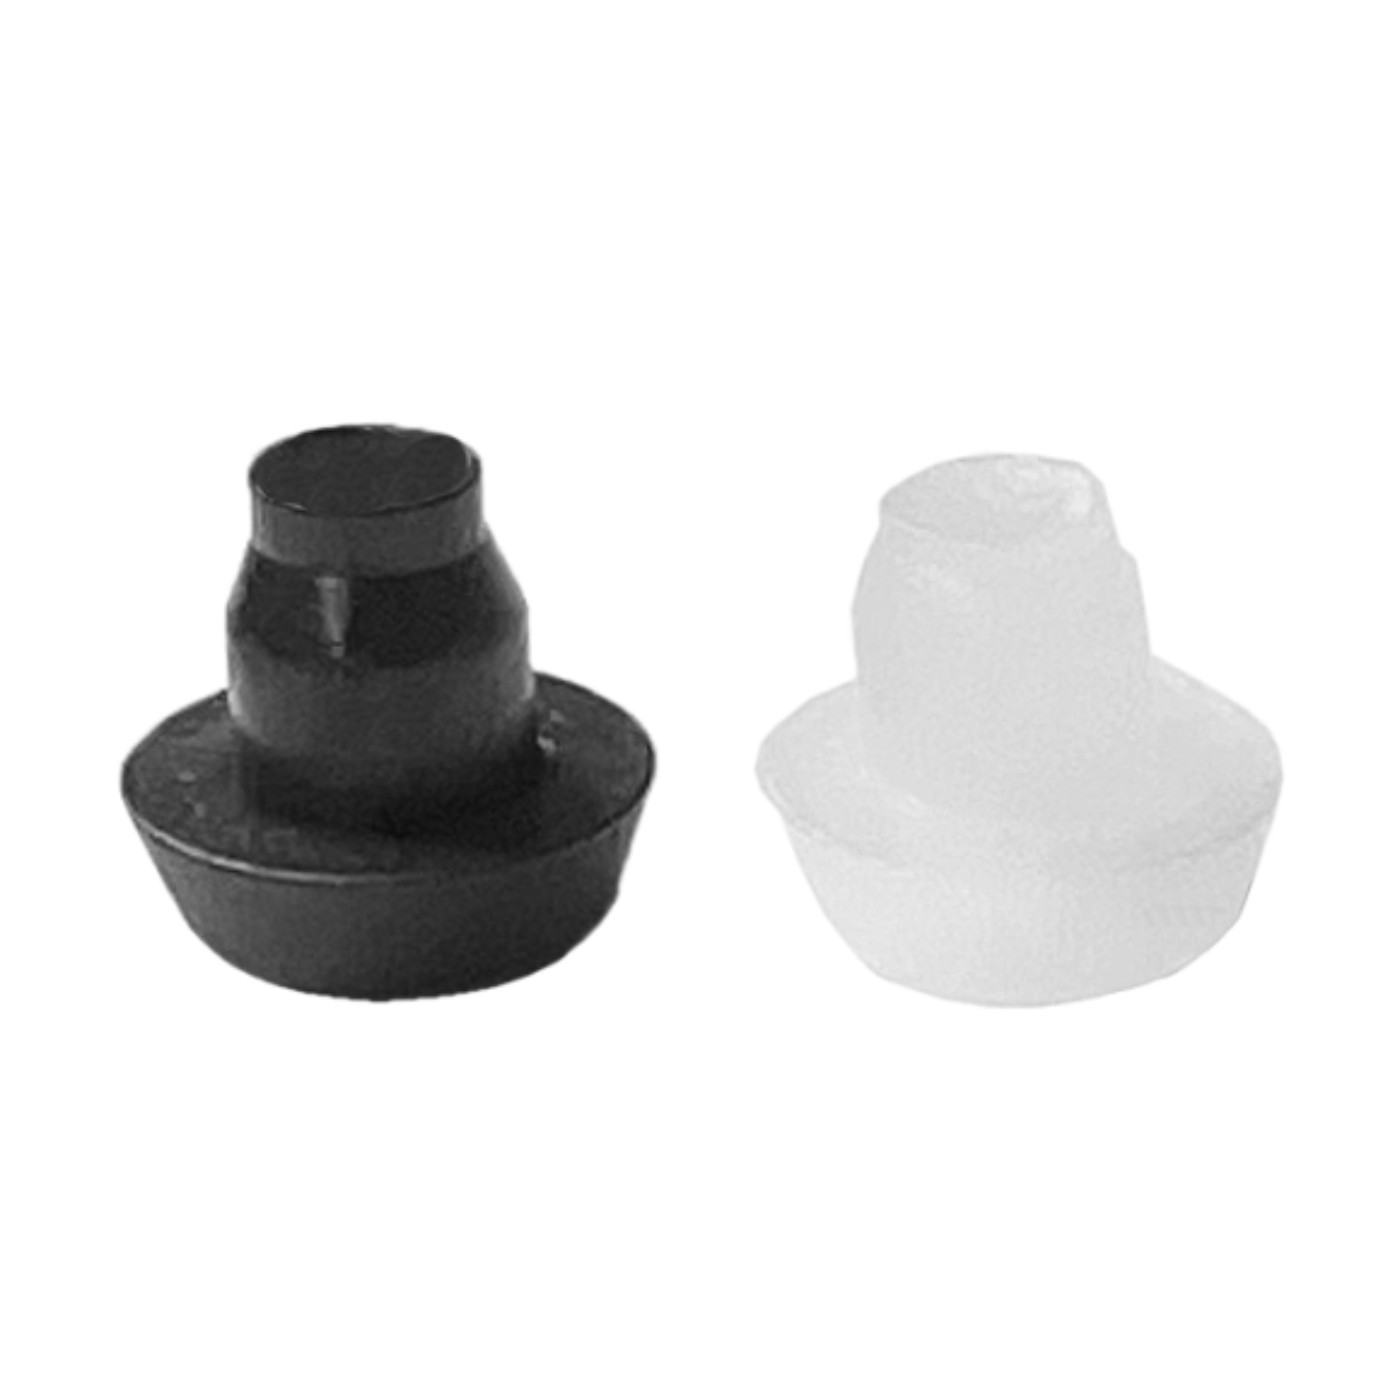 Set of 50 PVC plugs, buffers, bumpers (inside, round, 6.3 mm